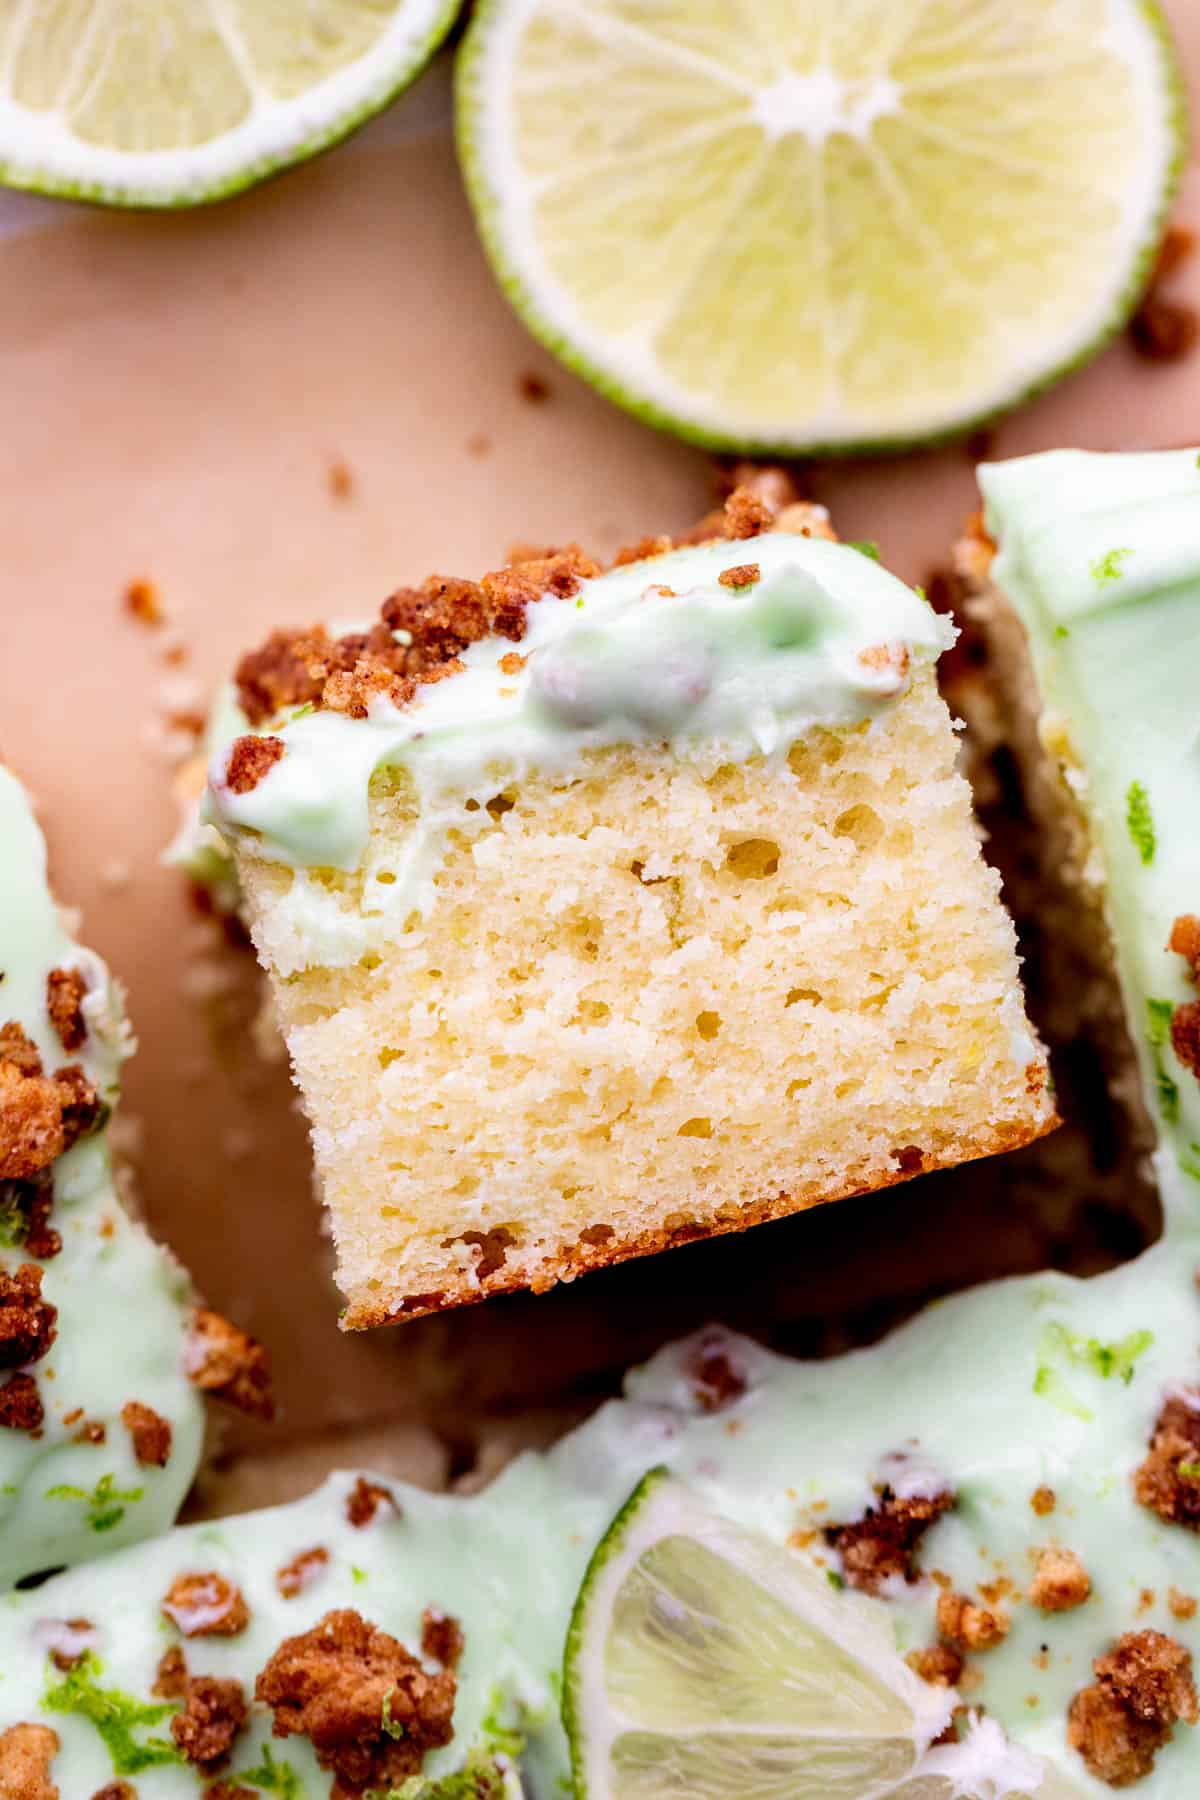 Piece of key lime pie cake on its side.